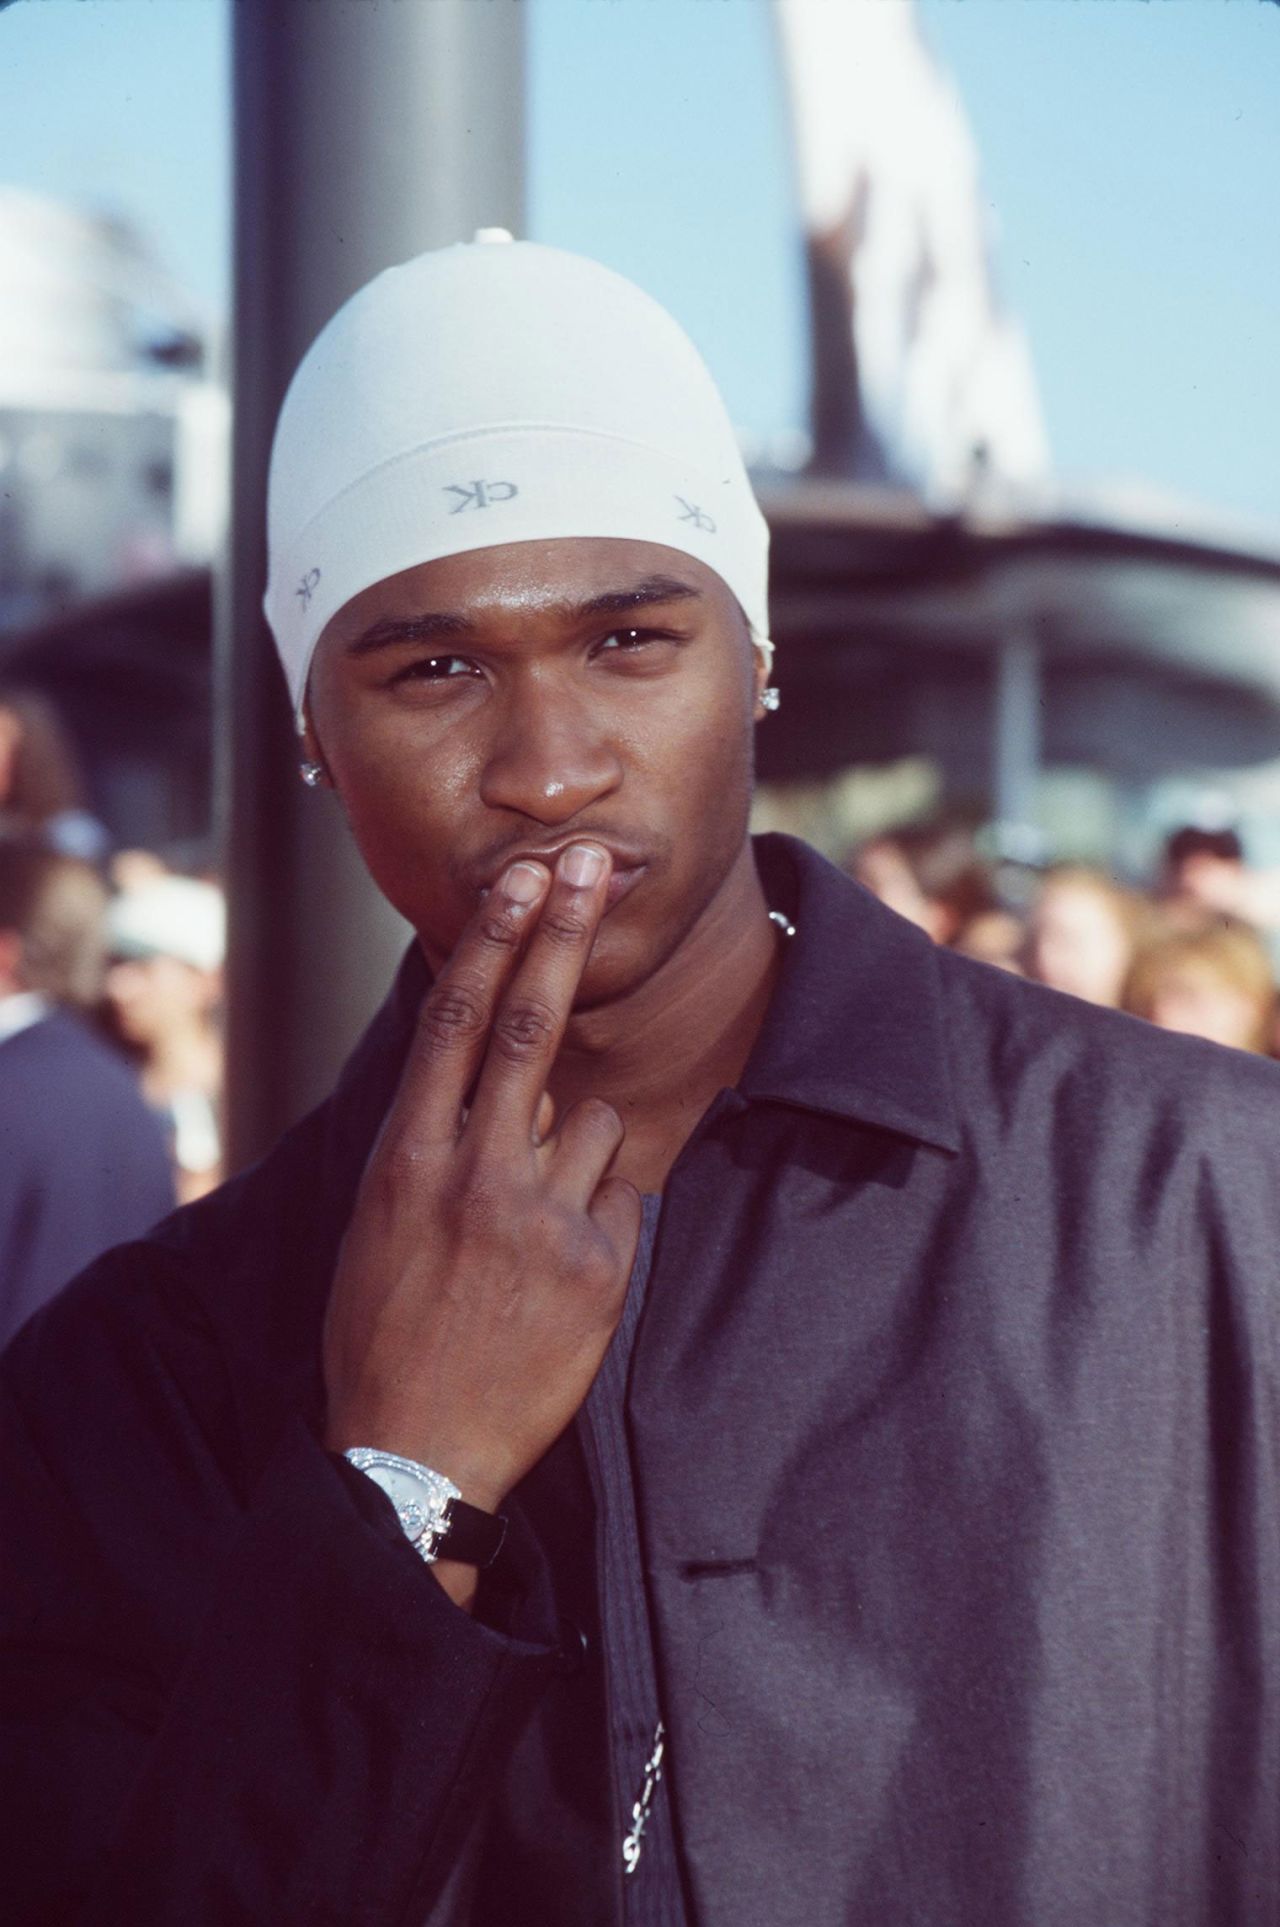 Usher, seen here at the 1998 MTV Video Music Awards, had the seductive dance moves (and impressive abs) that are requisite for heartthrob status. He showed off both<a href="http://www.youtube.com/watch?v=bQRzrnH6_HY" target="_blank" target="_blank"> in the music video</a> that accompanied his 1997 single, "You Make Me Wanna."